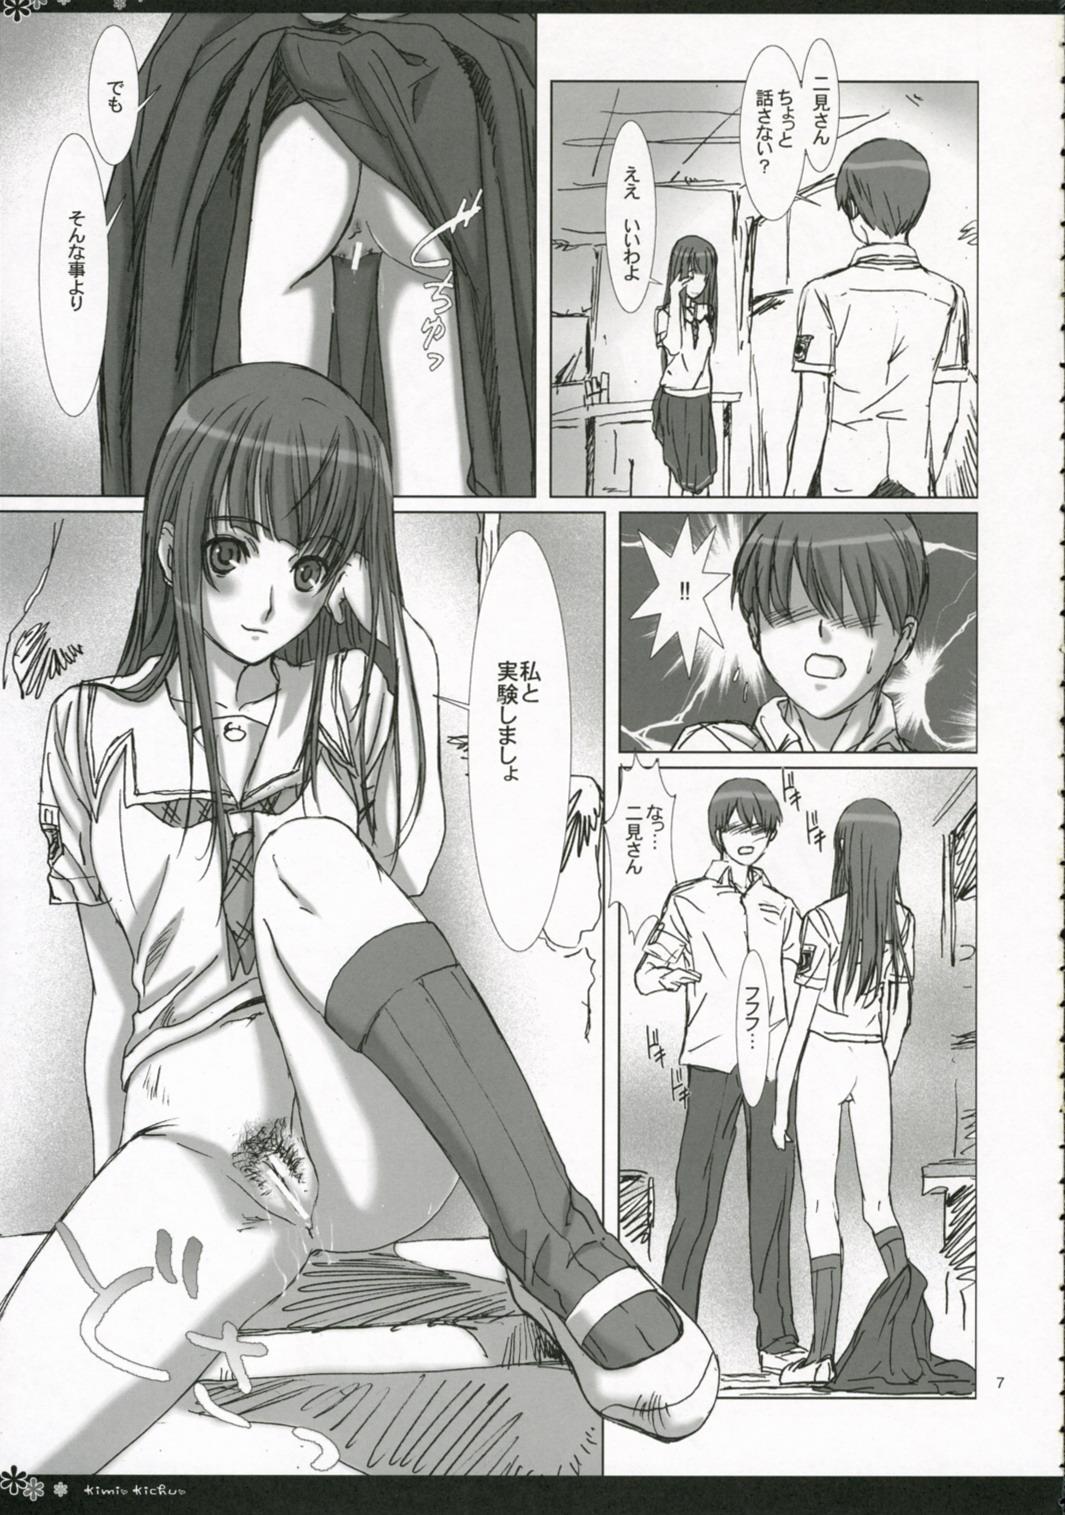 Best Blowjobs Ever Kimikichu - Kimikiss Amature - Page 6